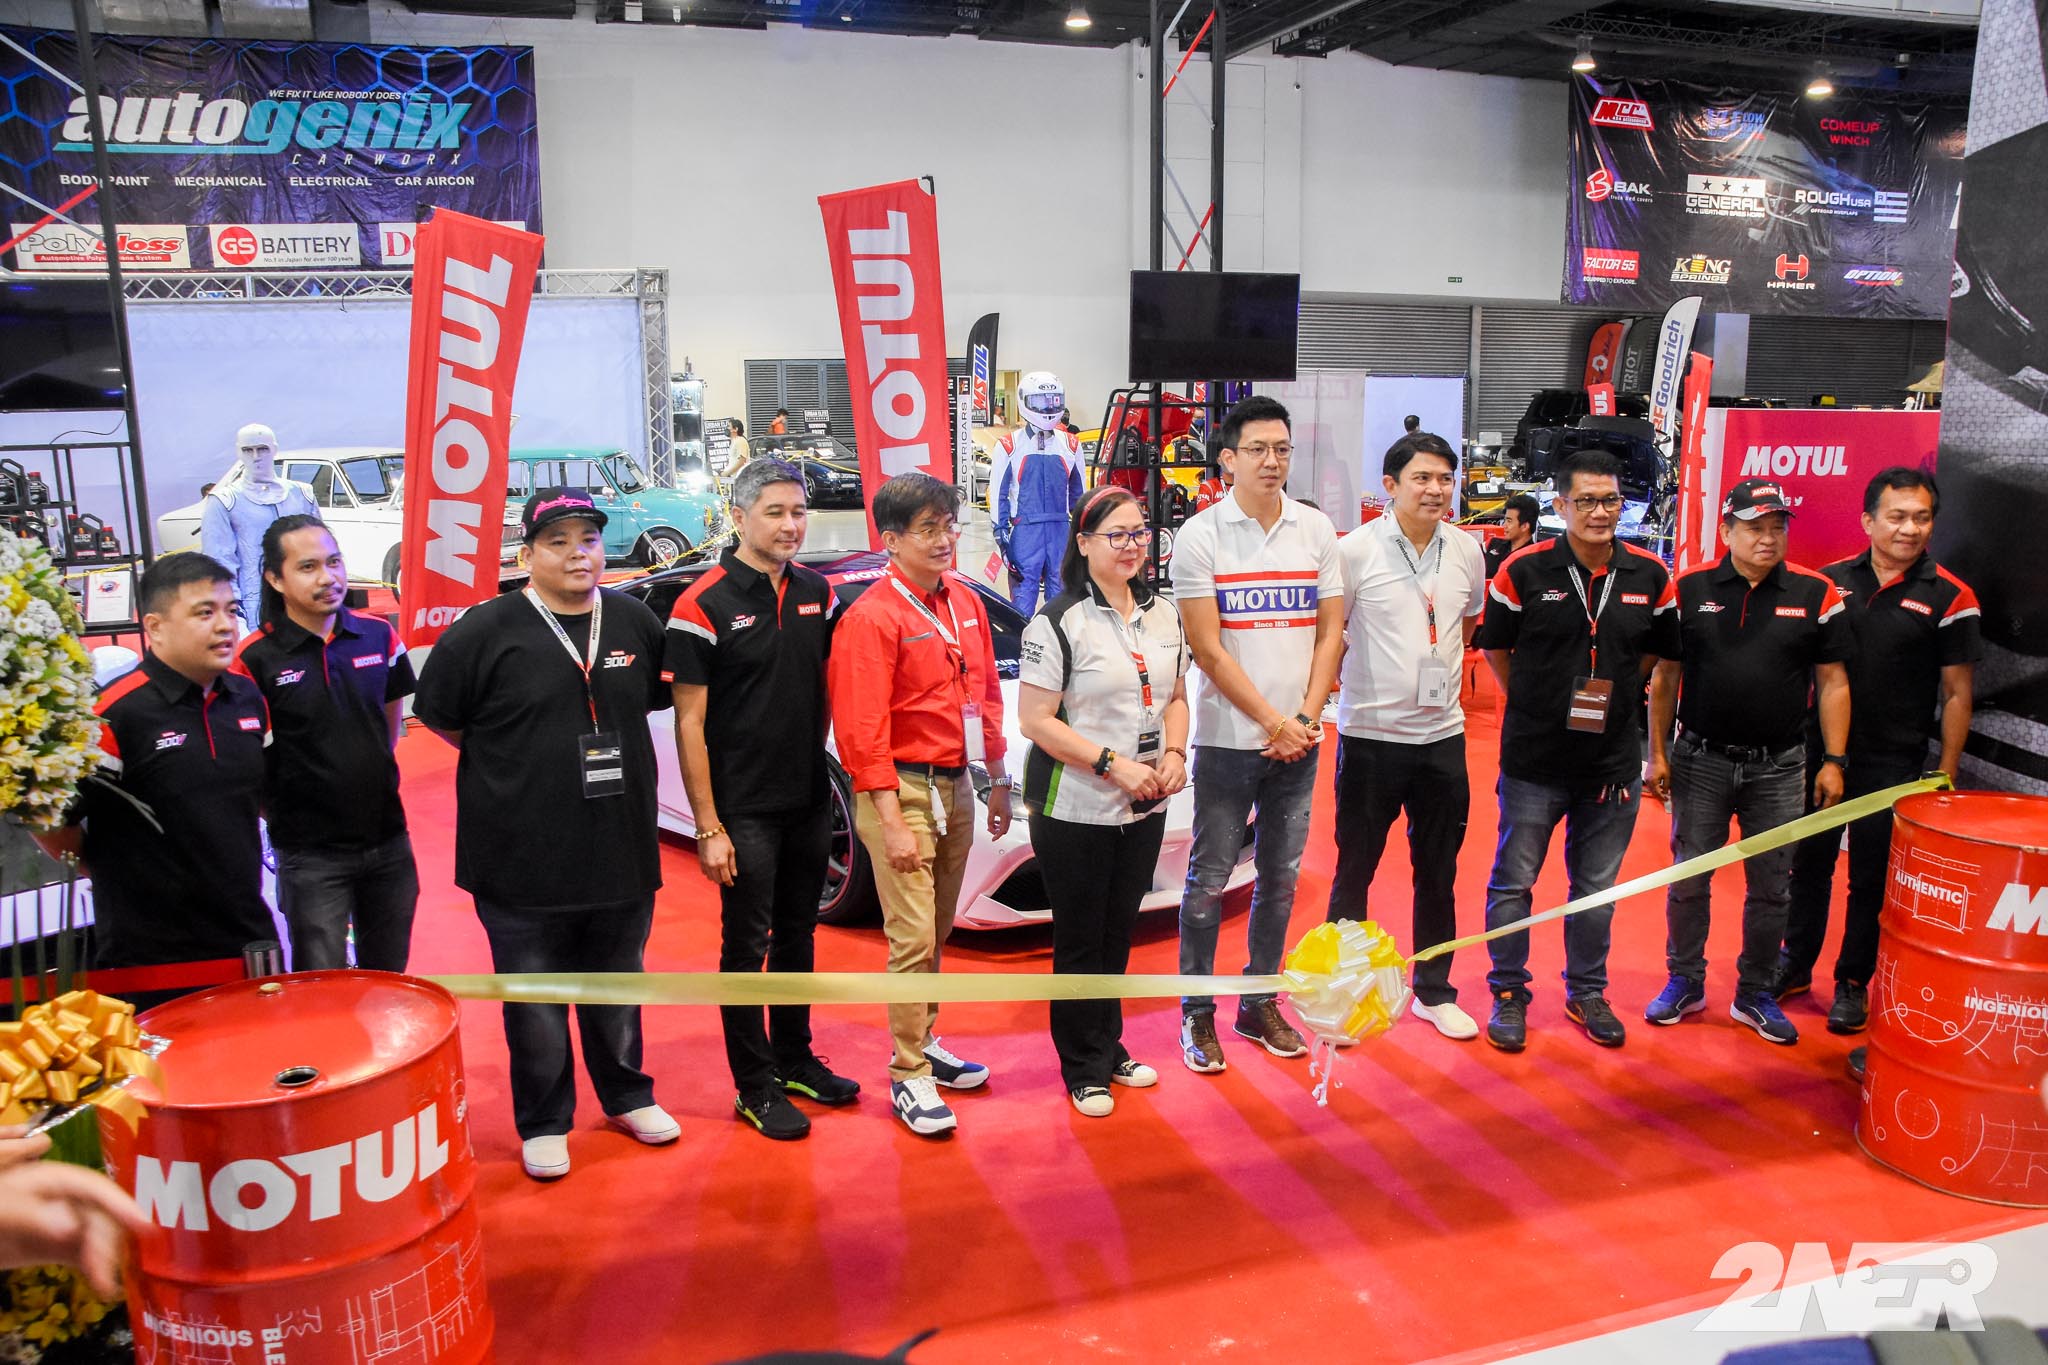 TransSportShow is back with all cylinders firing